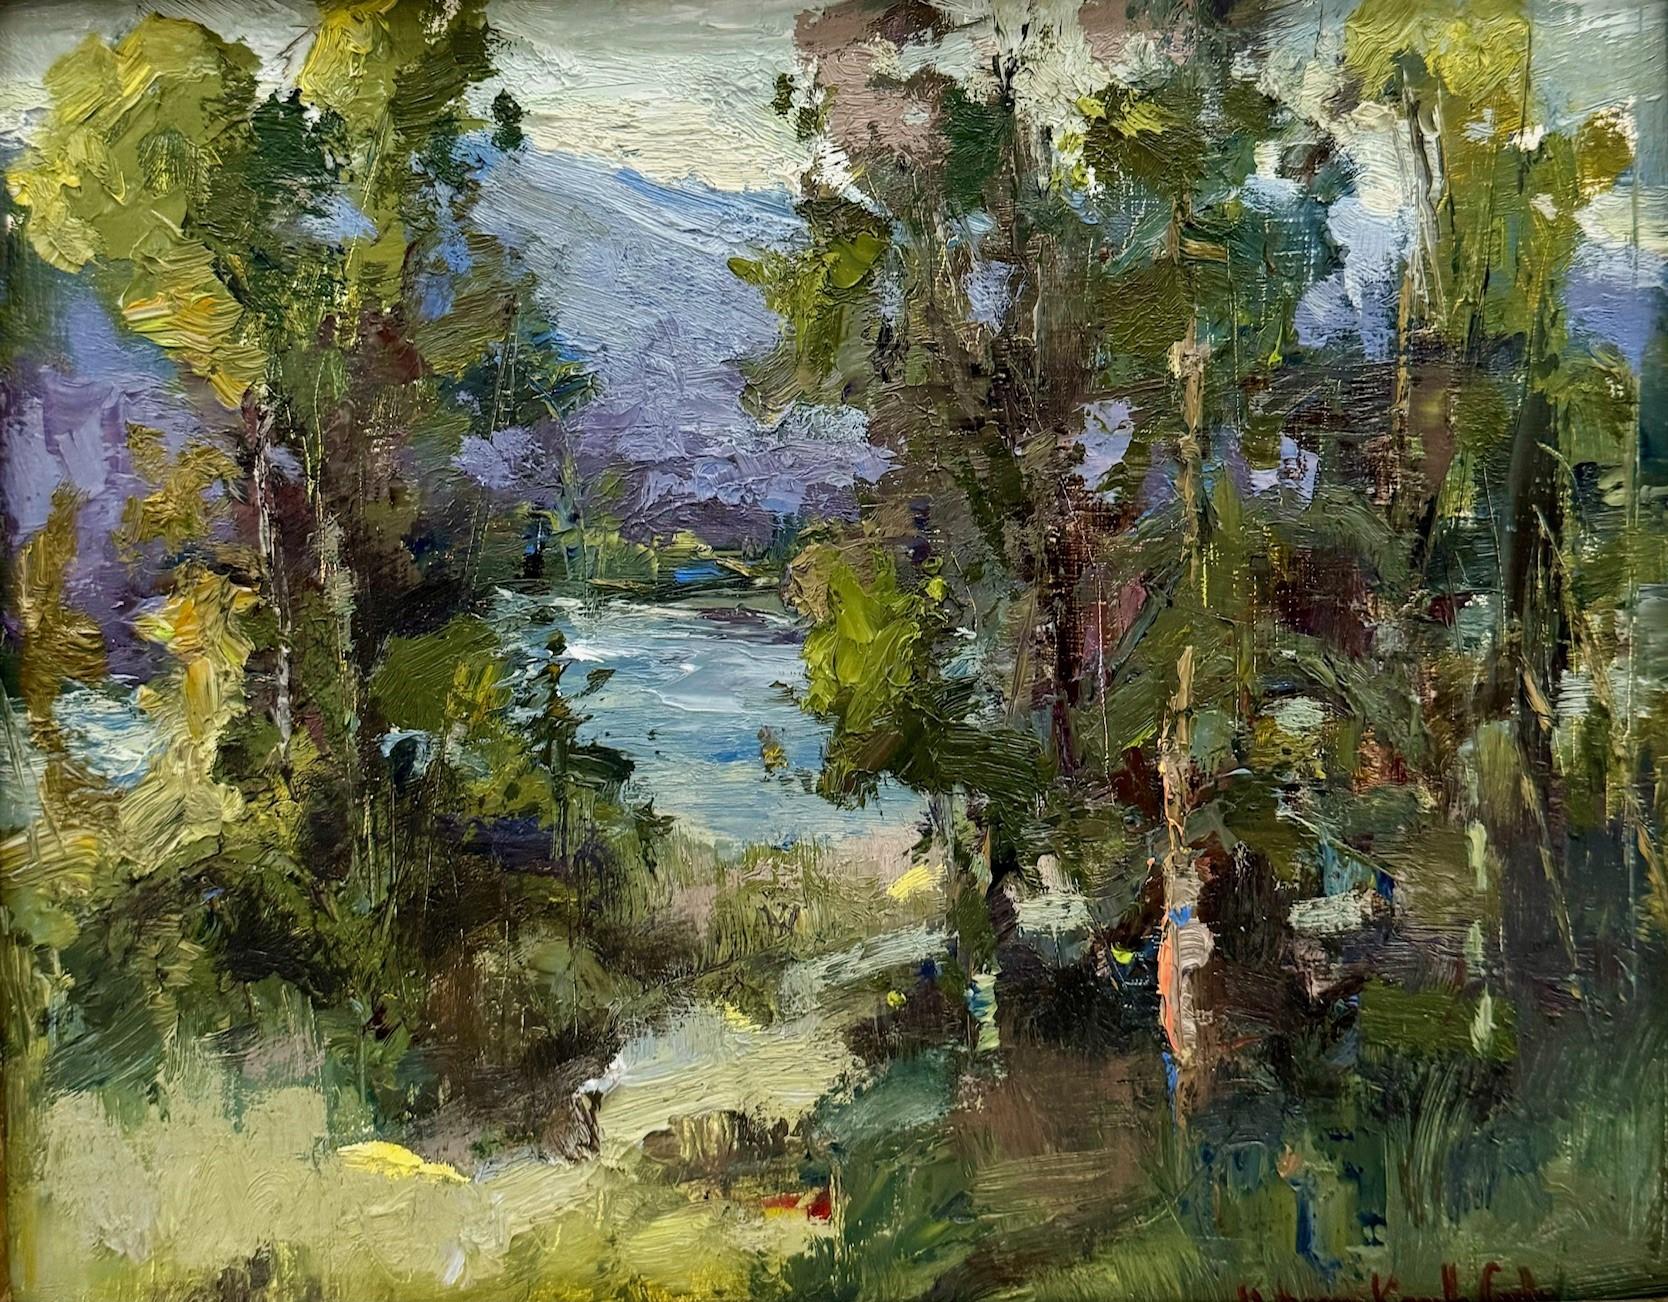 Bethanne Kinsella Cople Landscape Painting - Symphony in Blue and Green by Bethanne Cople, Oil on Board Landscape painting